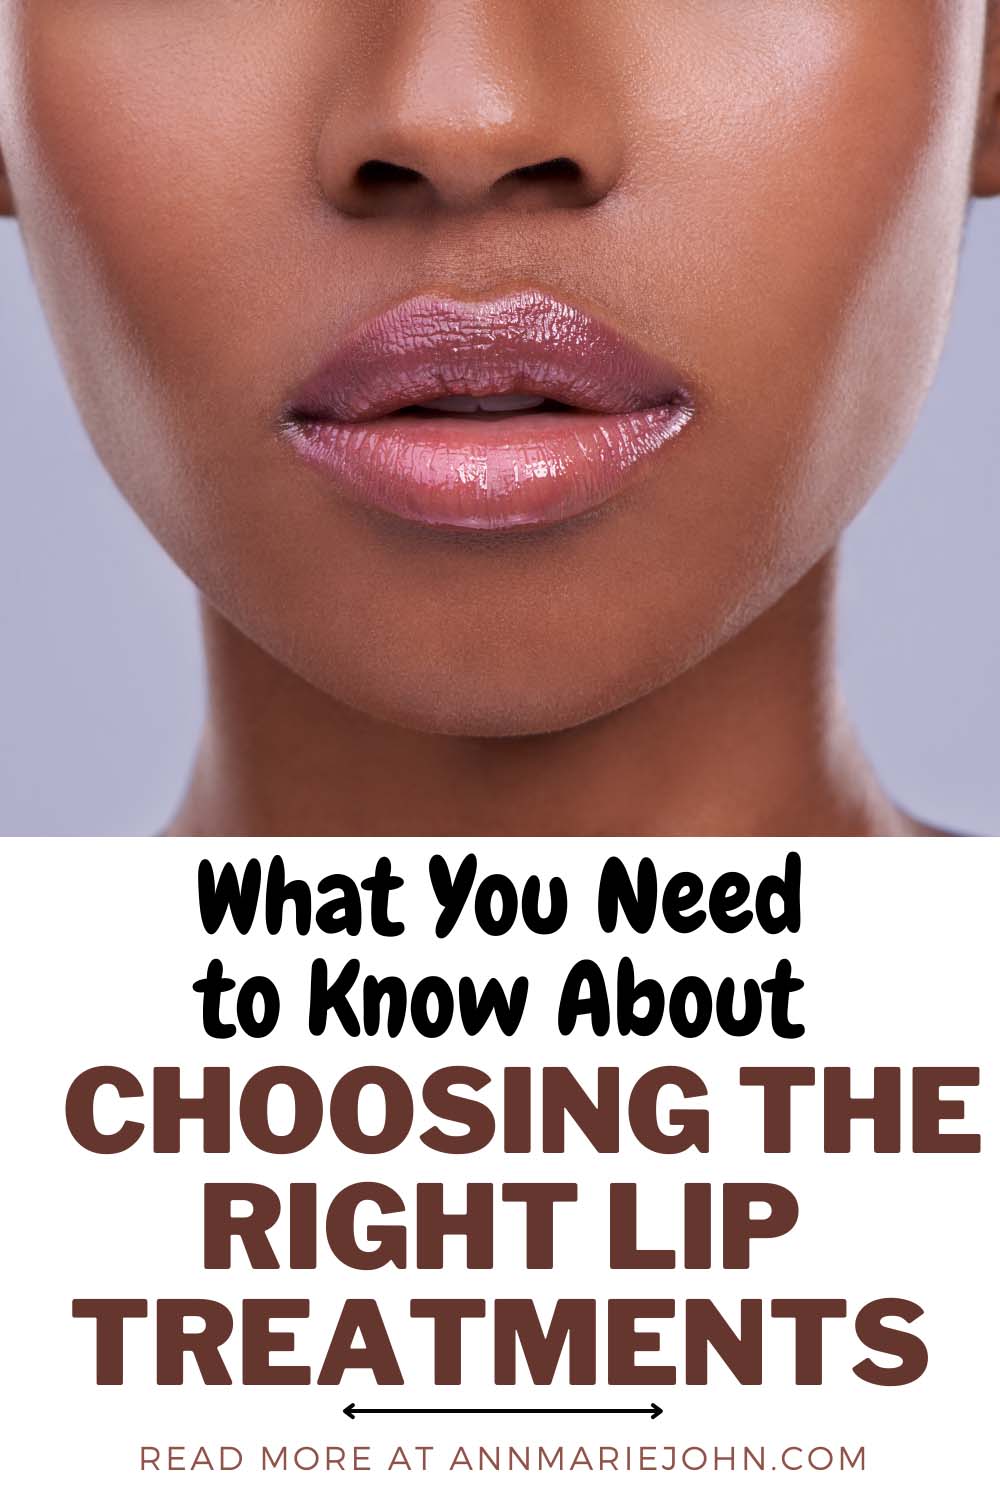 What You Need to Know About Choosing the Right Lip Treatments